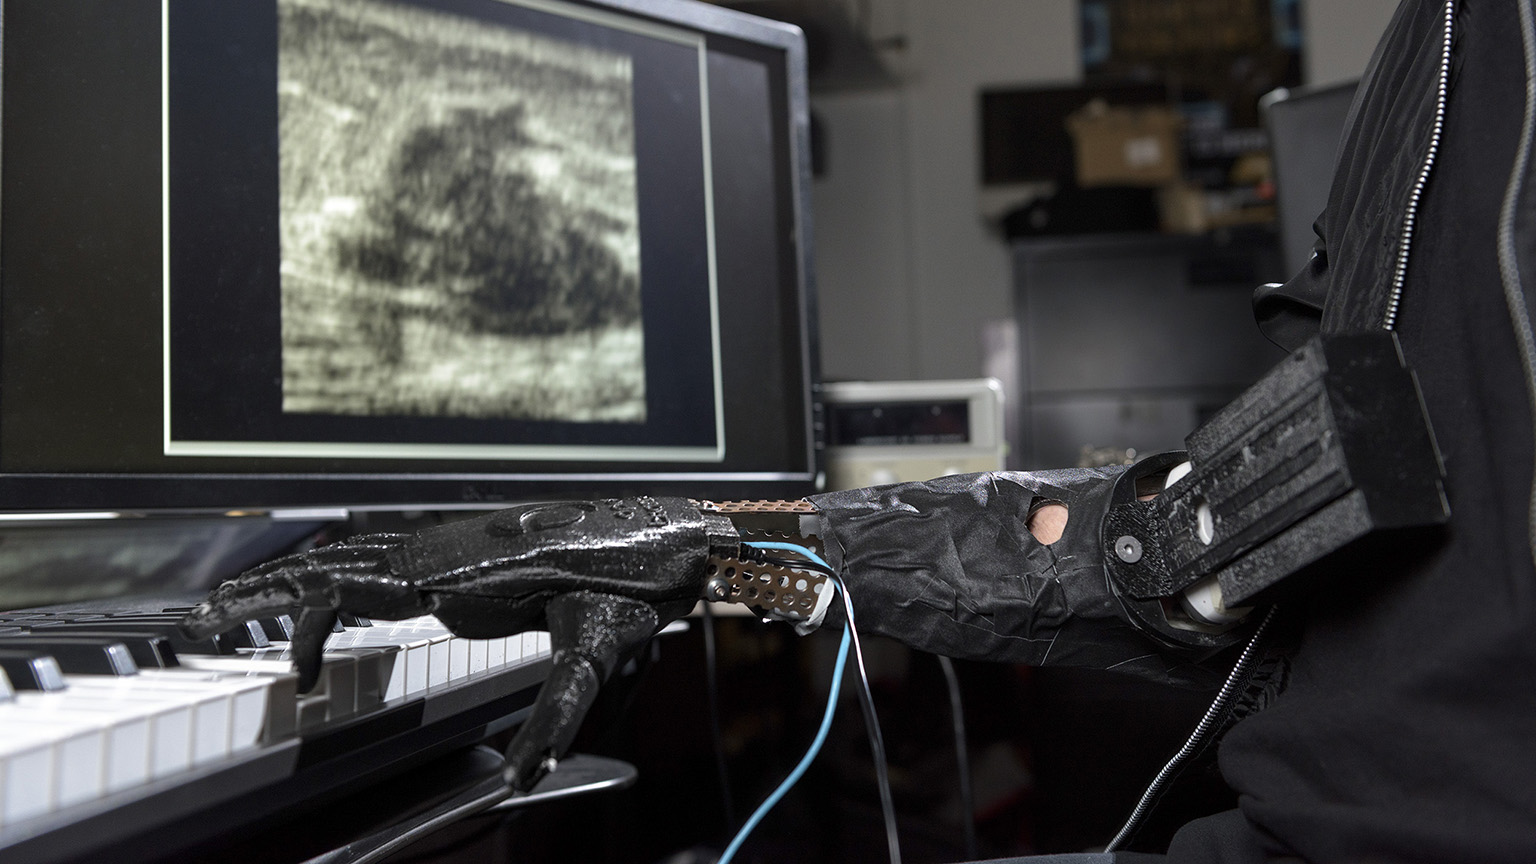 A robotic hand playing music on a keyboard.